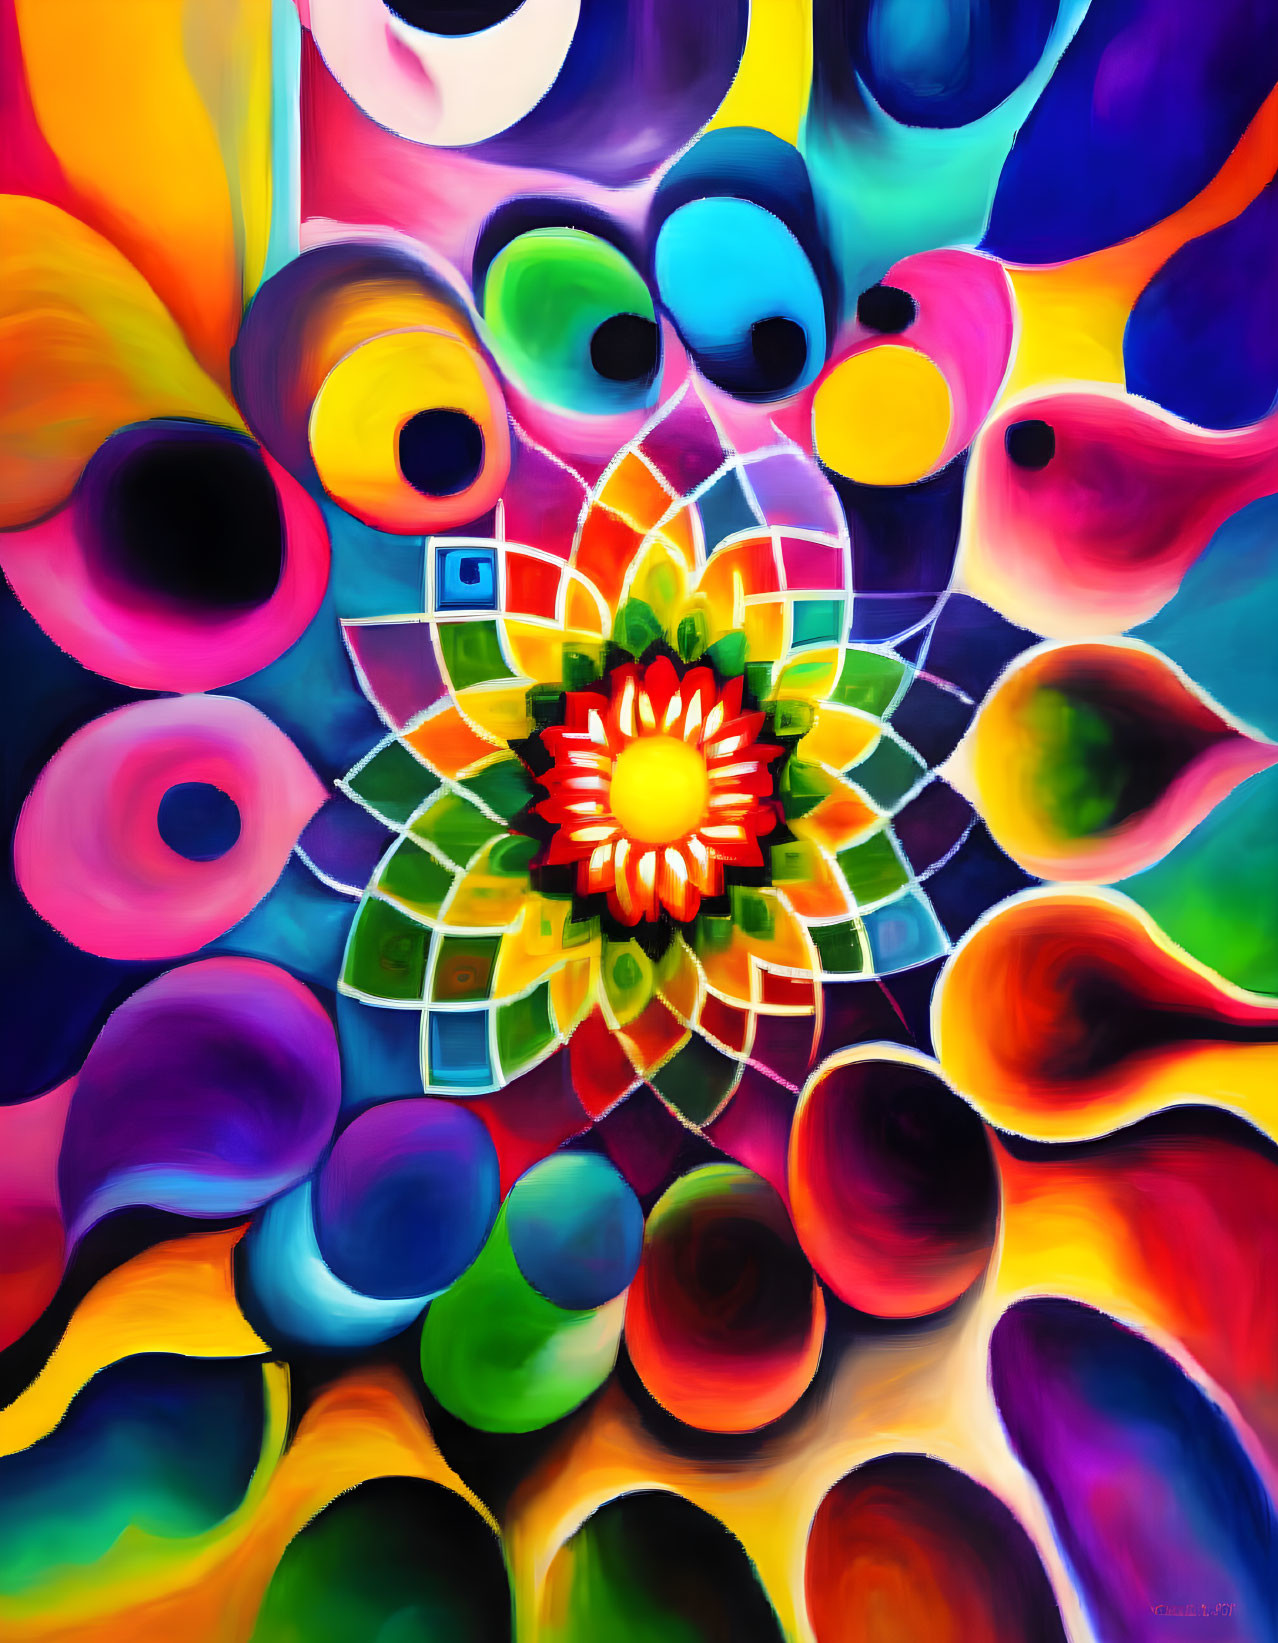 Colorful Abstract Painting with Mandala and Swirling Patterns